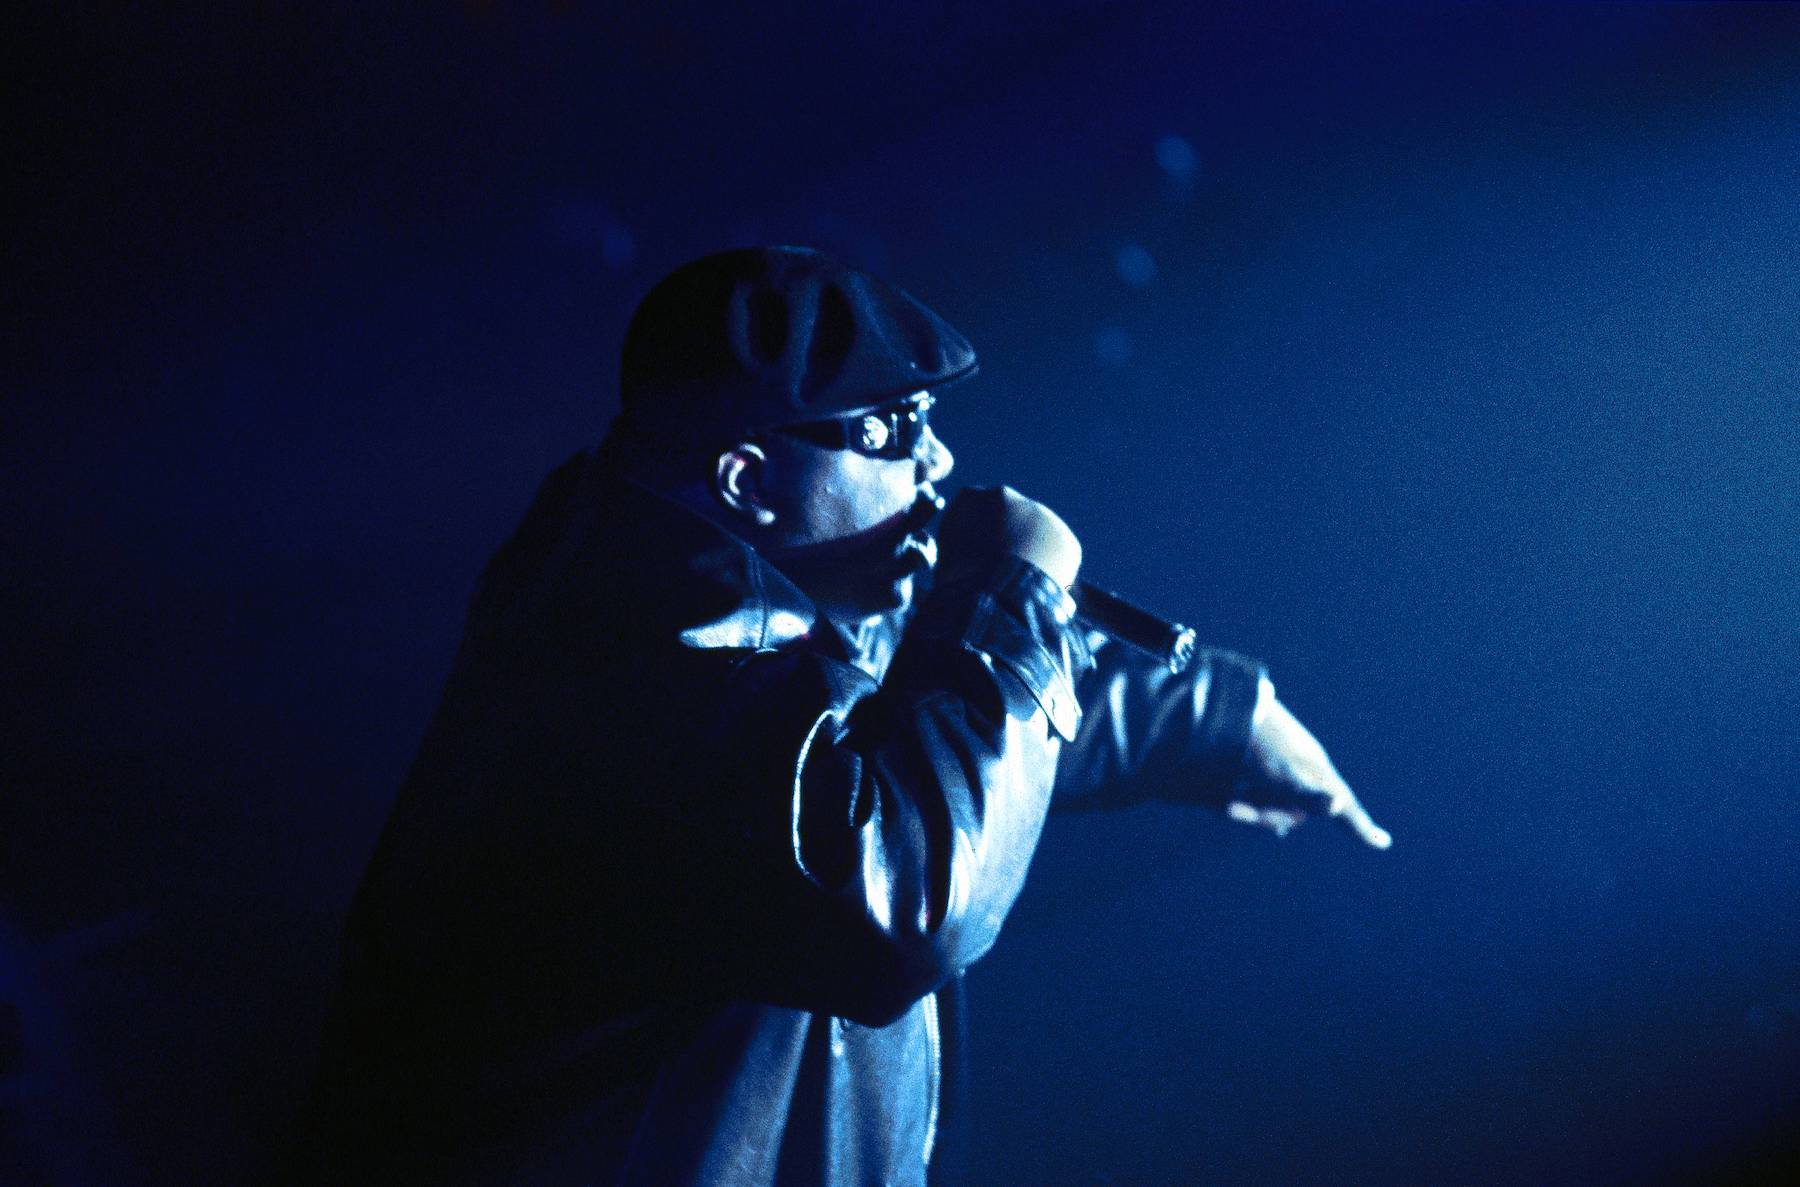 The Notorious B.I.G., who once recorded one of his last songs in a wheelchair, performing on stage wearing a black jacket